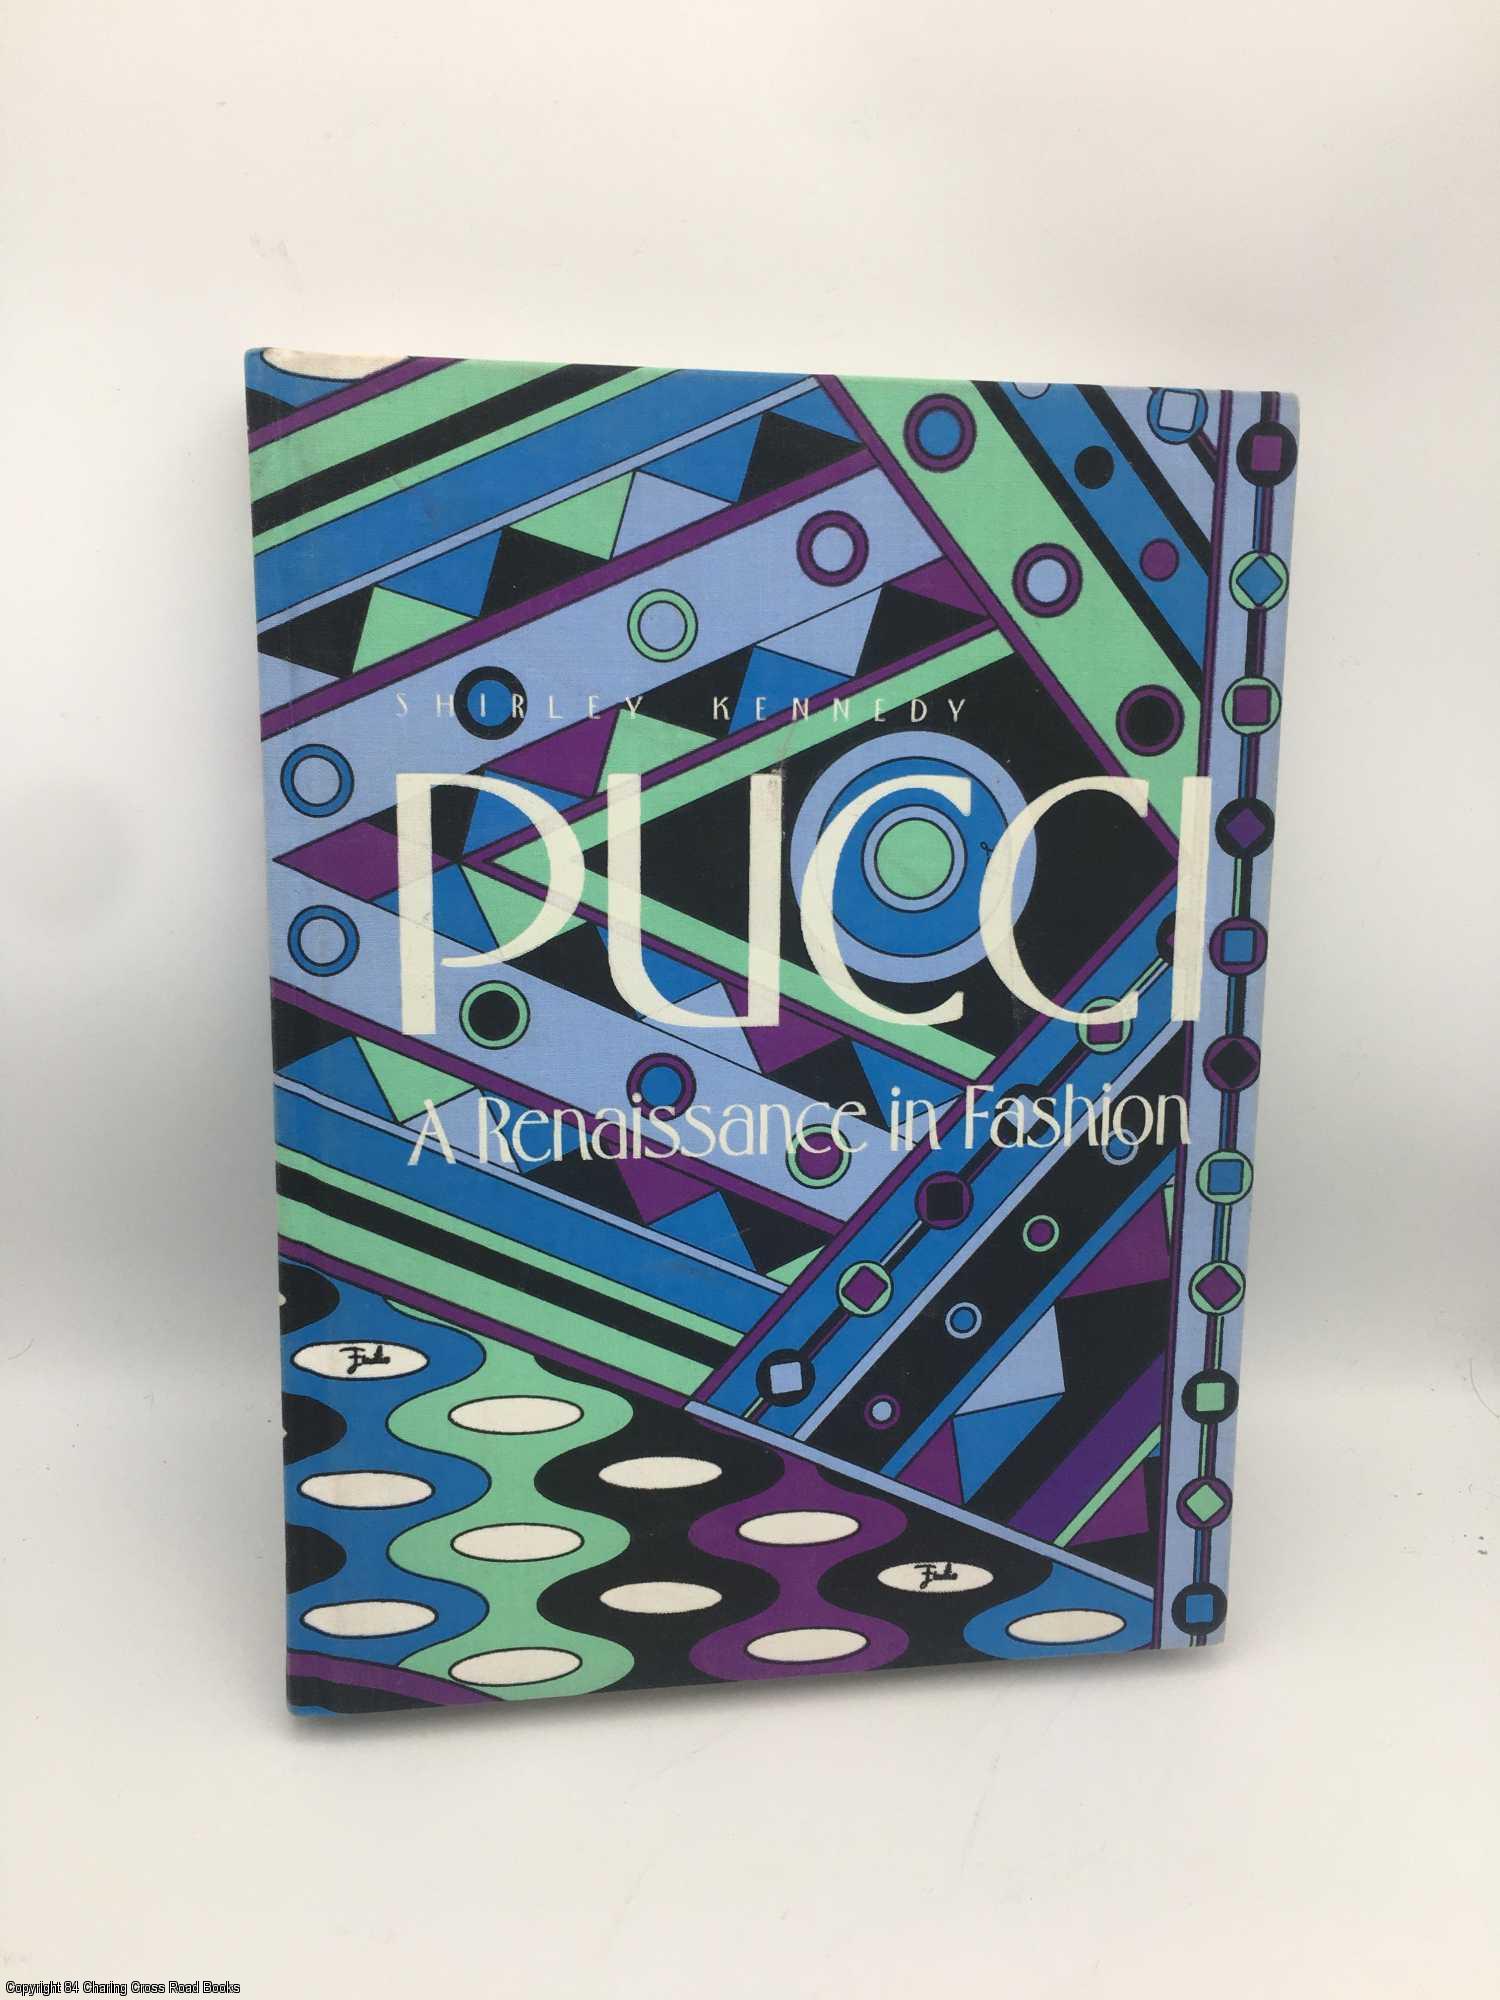 Pucci: A Renaissance in Fashion by Shirley Kennedy on 84 Charing Cross Rare  Books